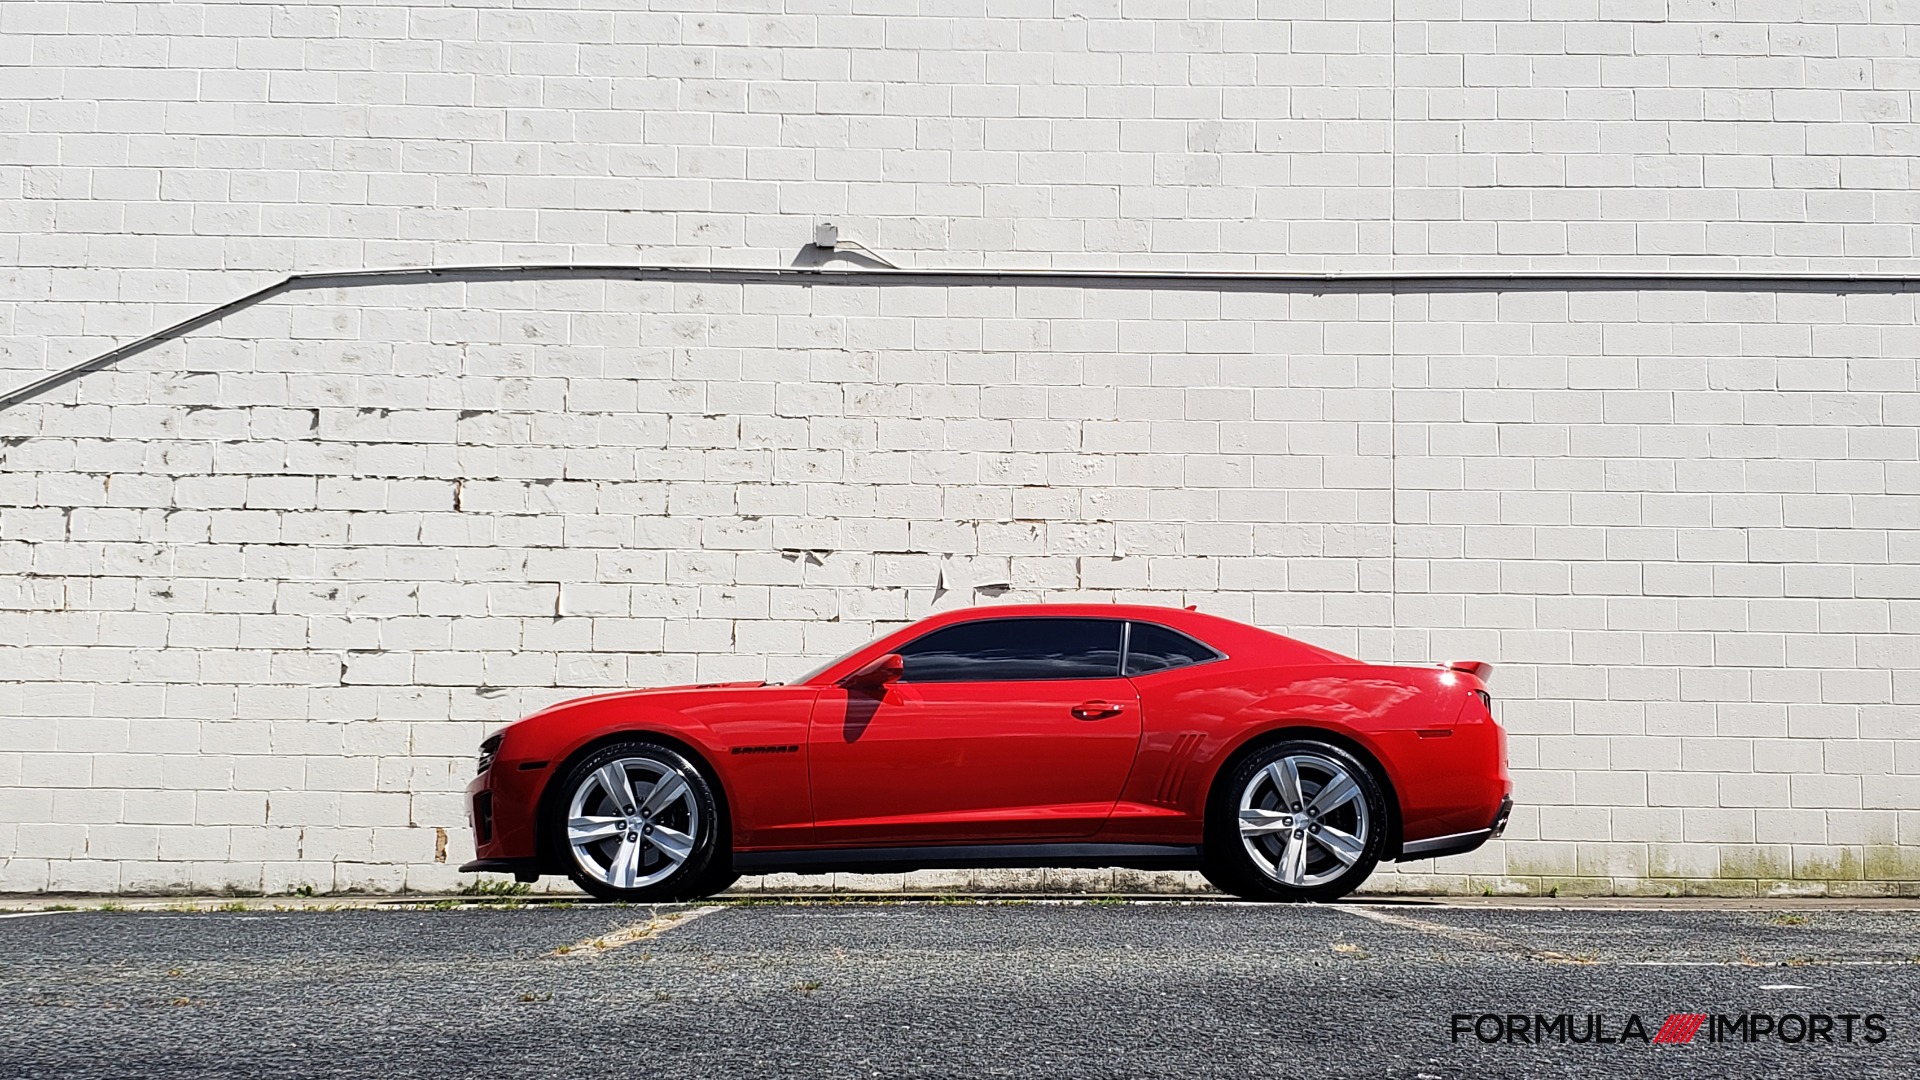 Used 2013 Chevrolet CAMARO ZL1 / 6.2L SUPERCHARGED 580HP / 6-SPD AUTO / NAV / REARVIEW for sale Sold at Formula Imports in Charlotte NC 28227 94